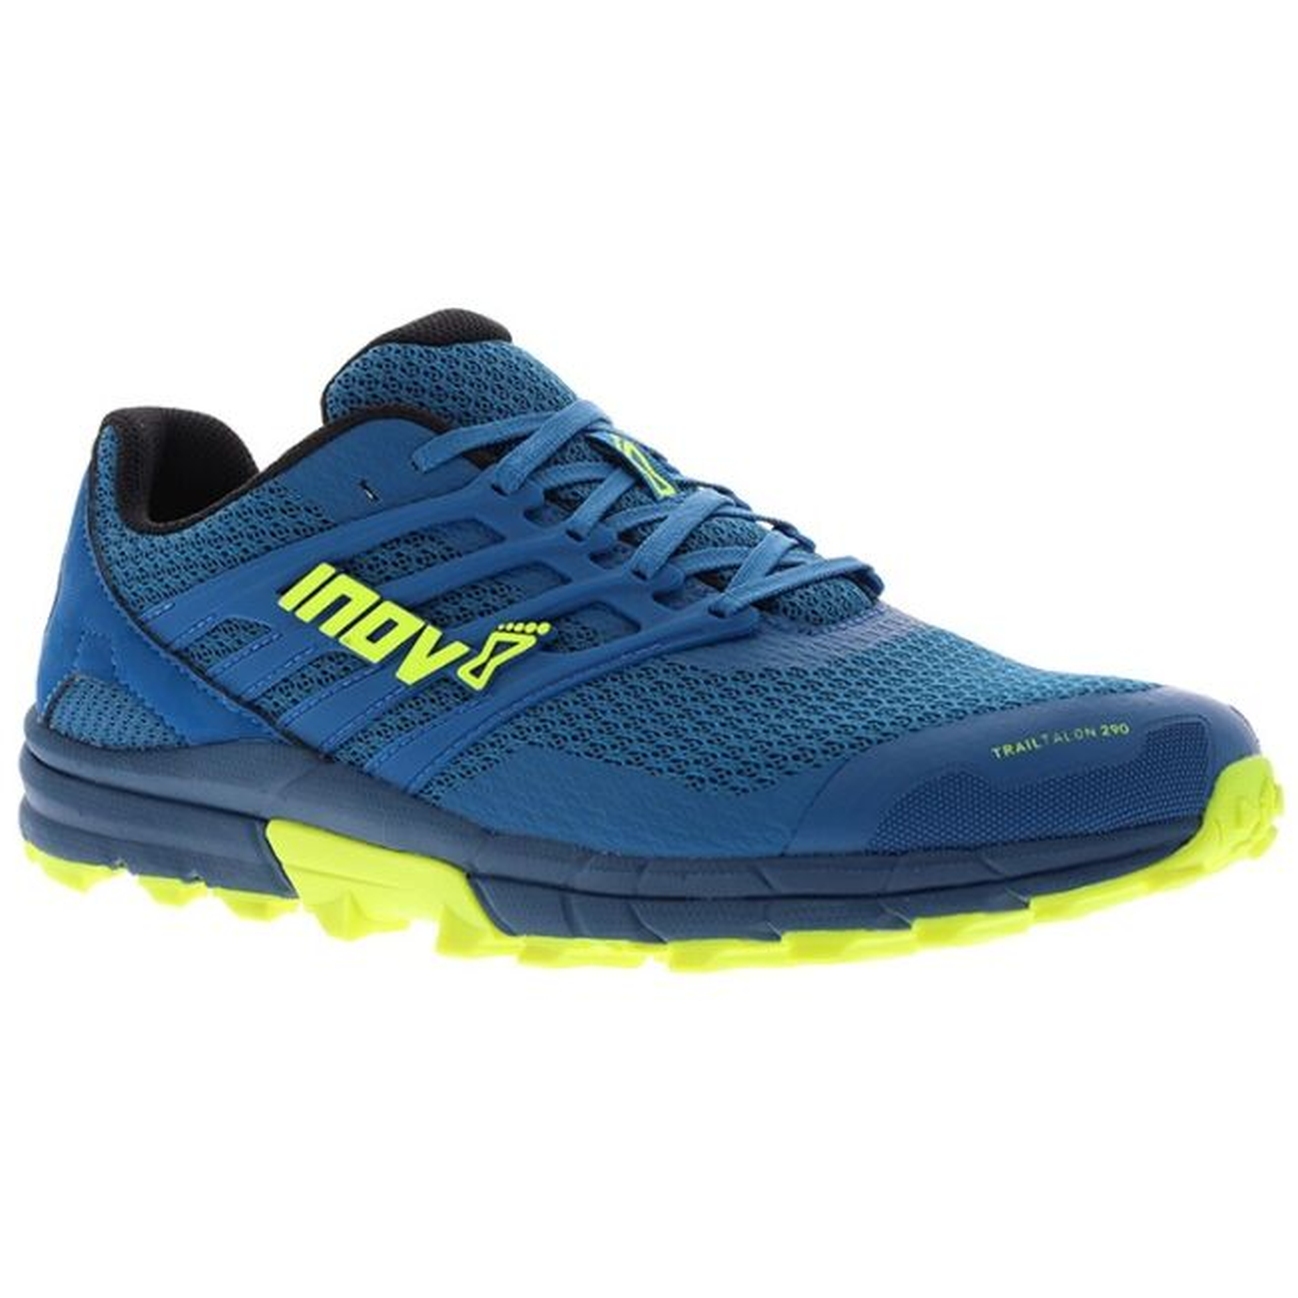 Picture of Inov-8 Trailtalon 290 Trail Running Shoes - blue/navy/yellow